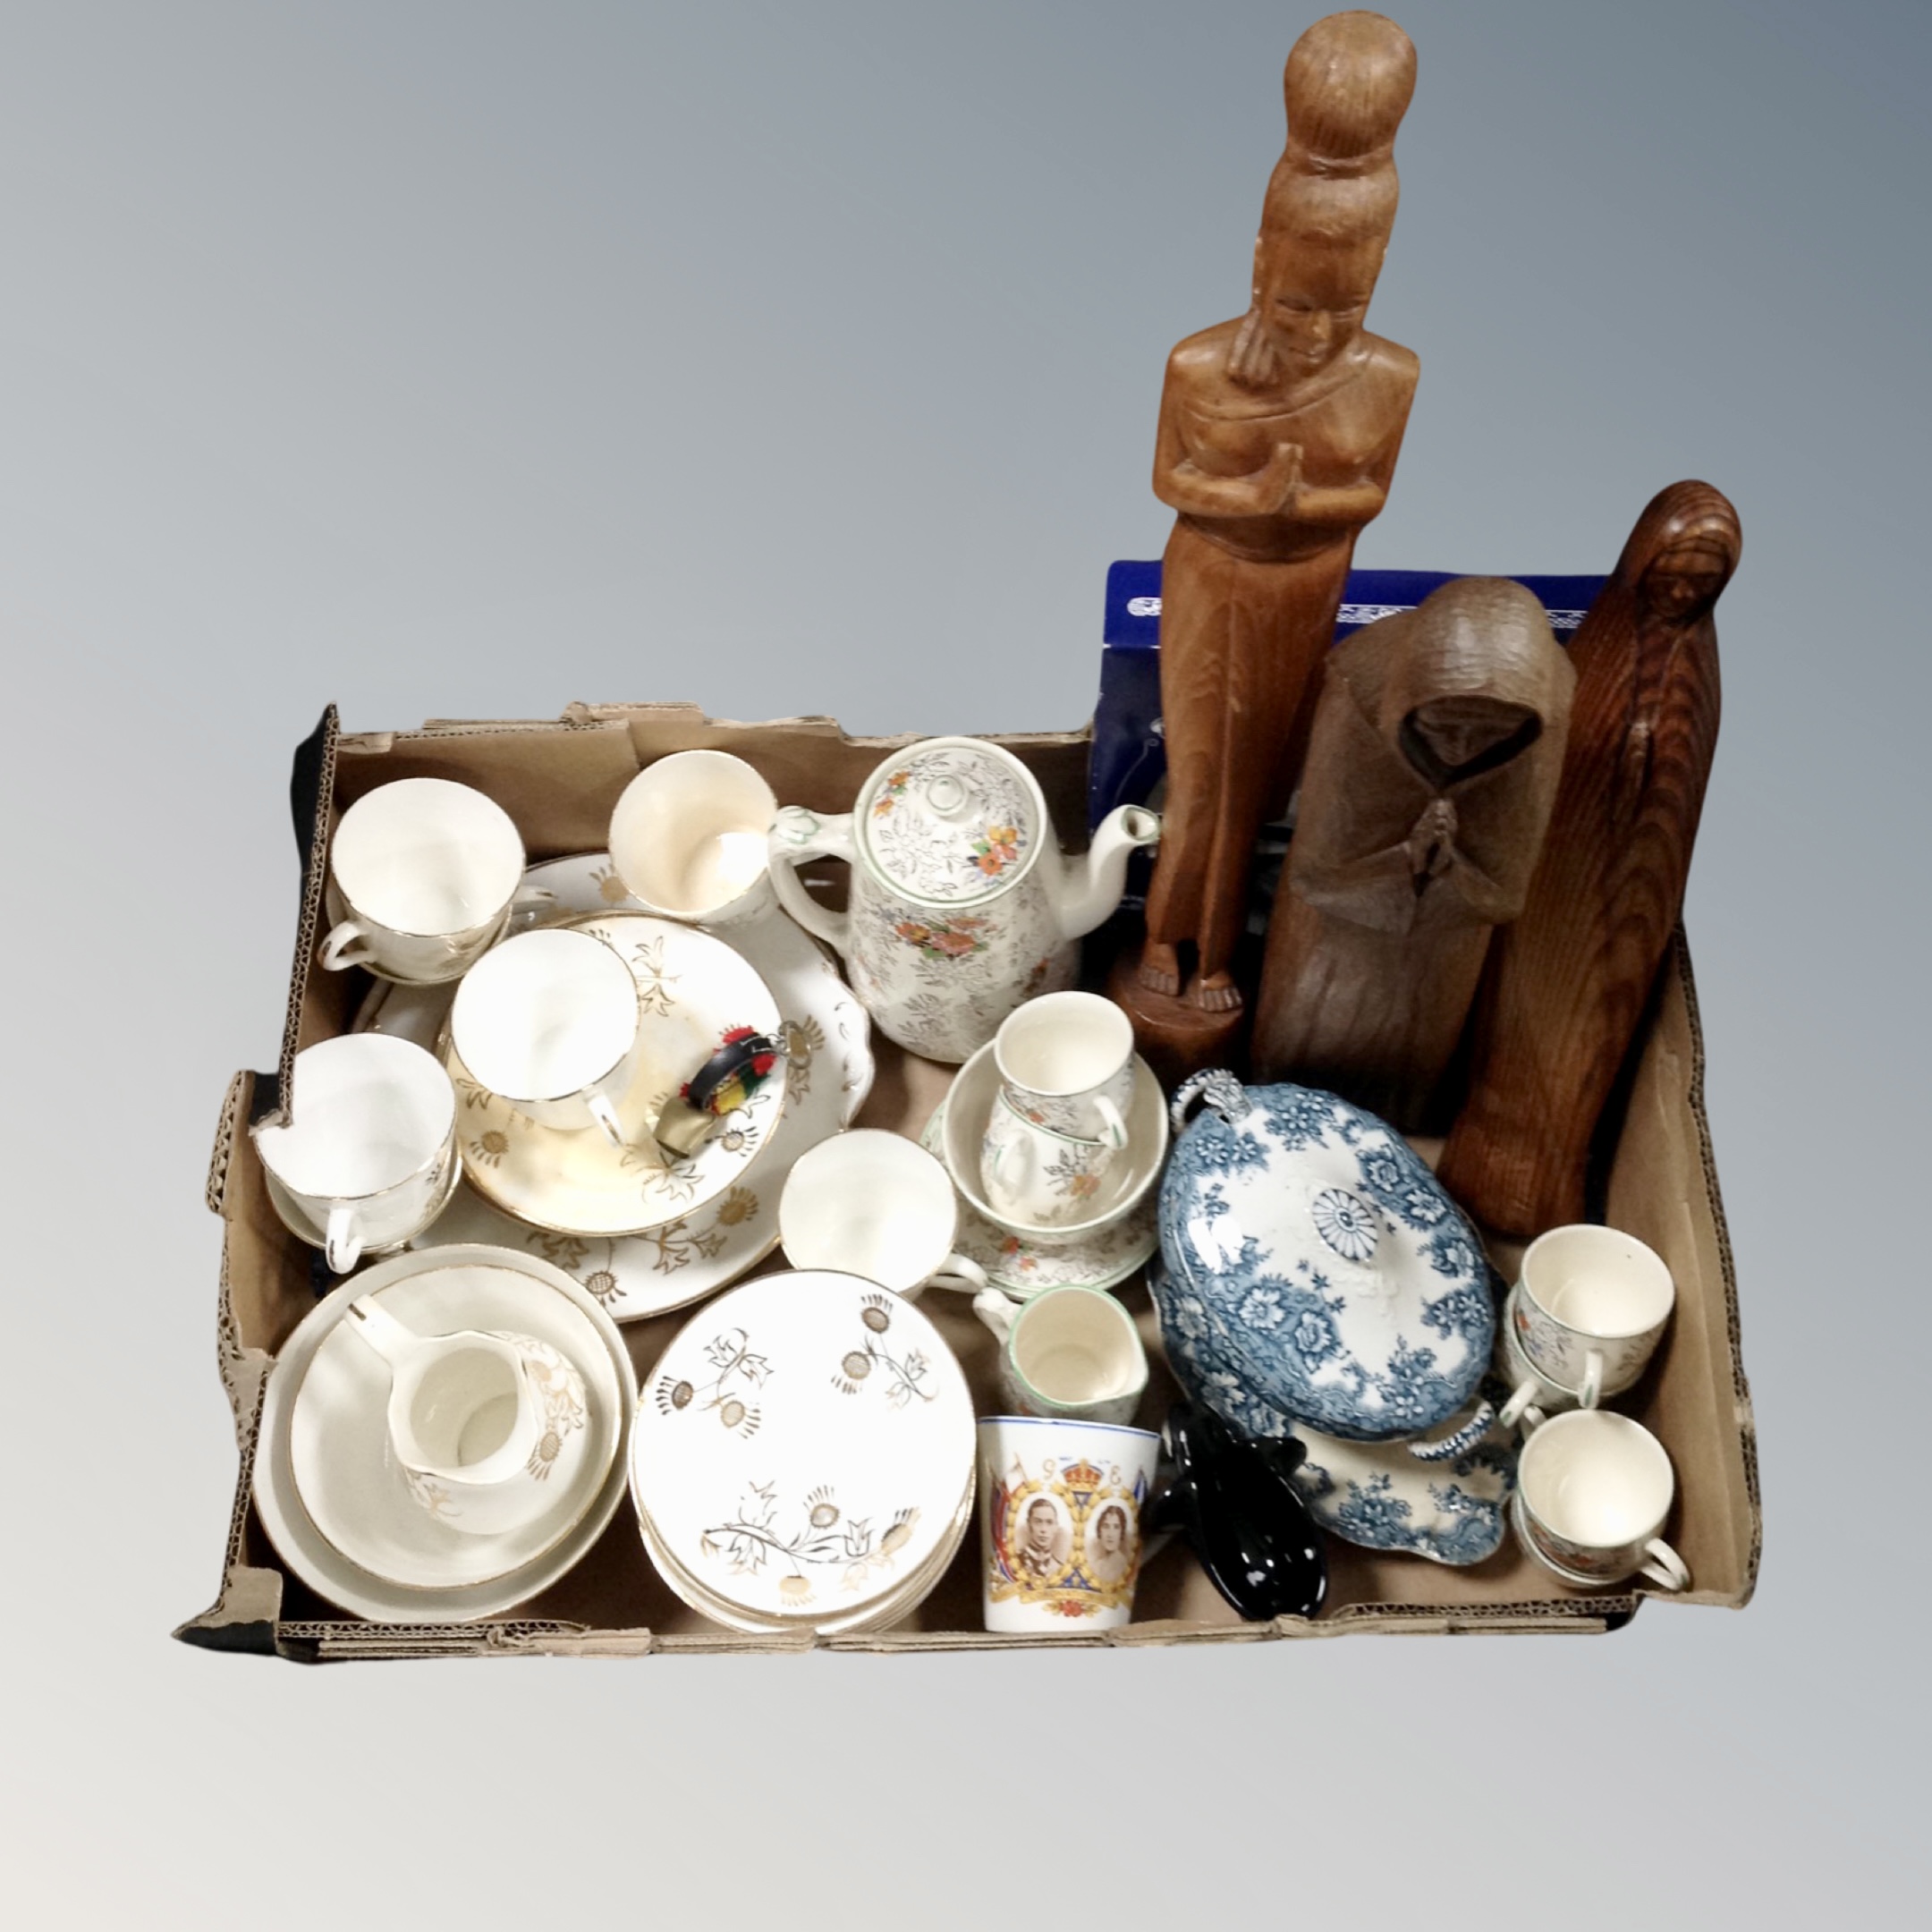 A box containing antique and later teaware, commemorative mug, carved wooden figures etc.